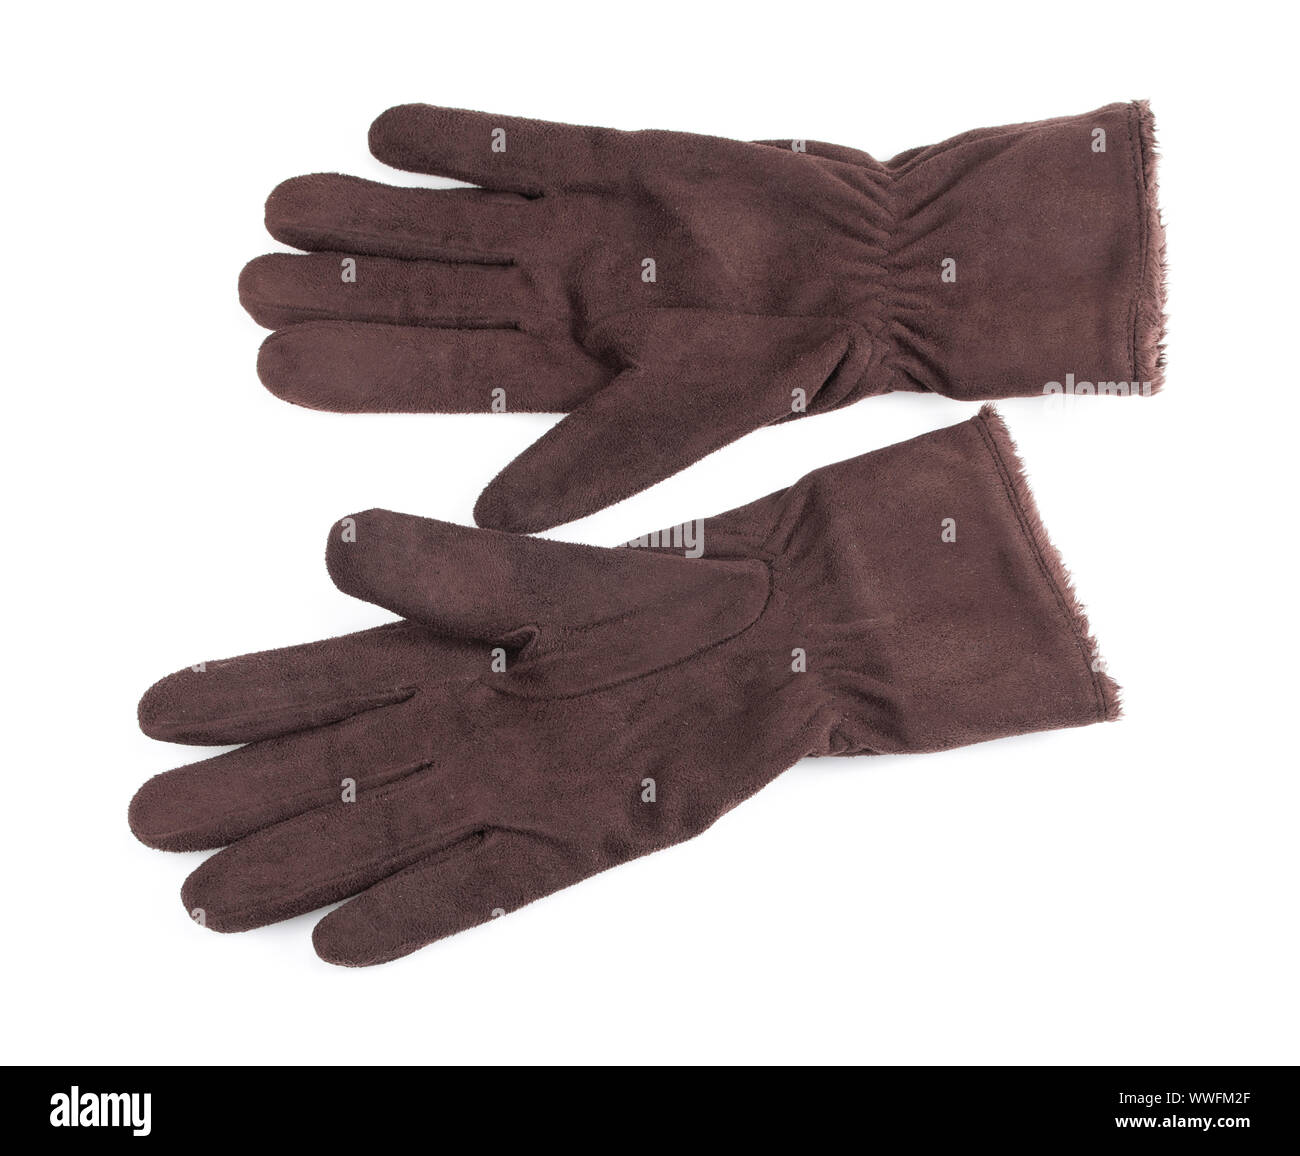 Knitted woolen brown gloves on a white background Stock Photo